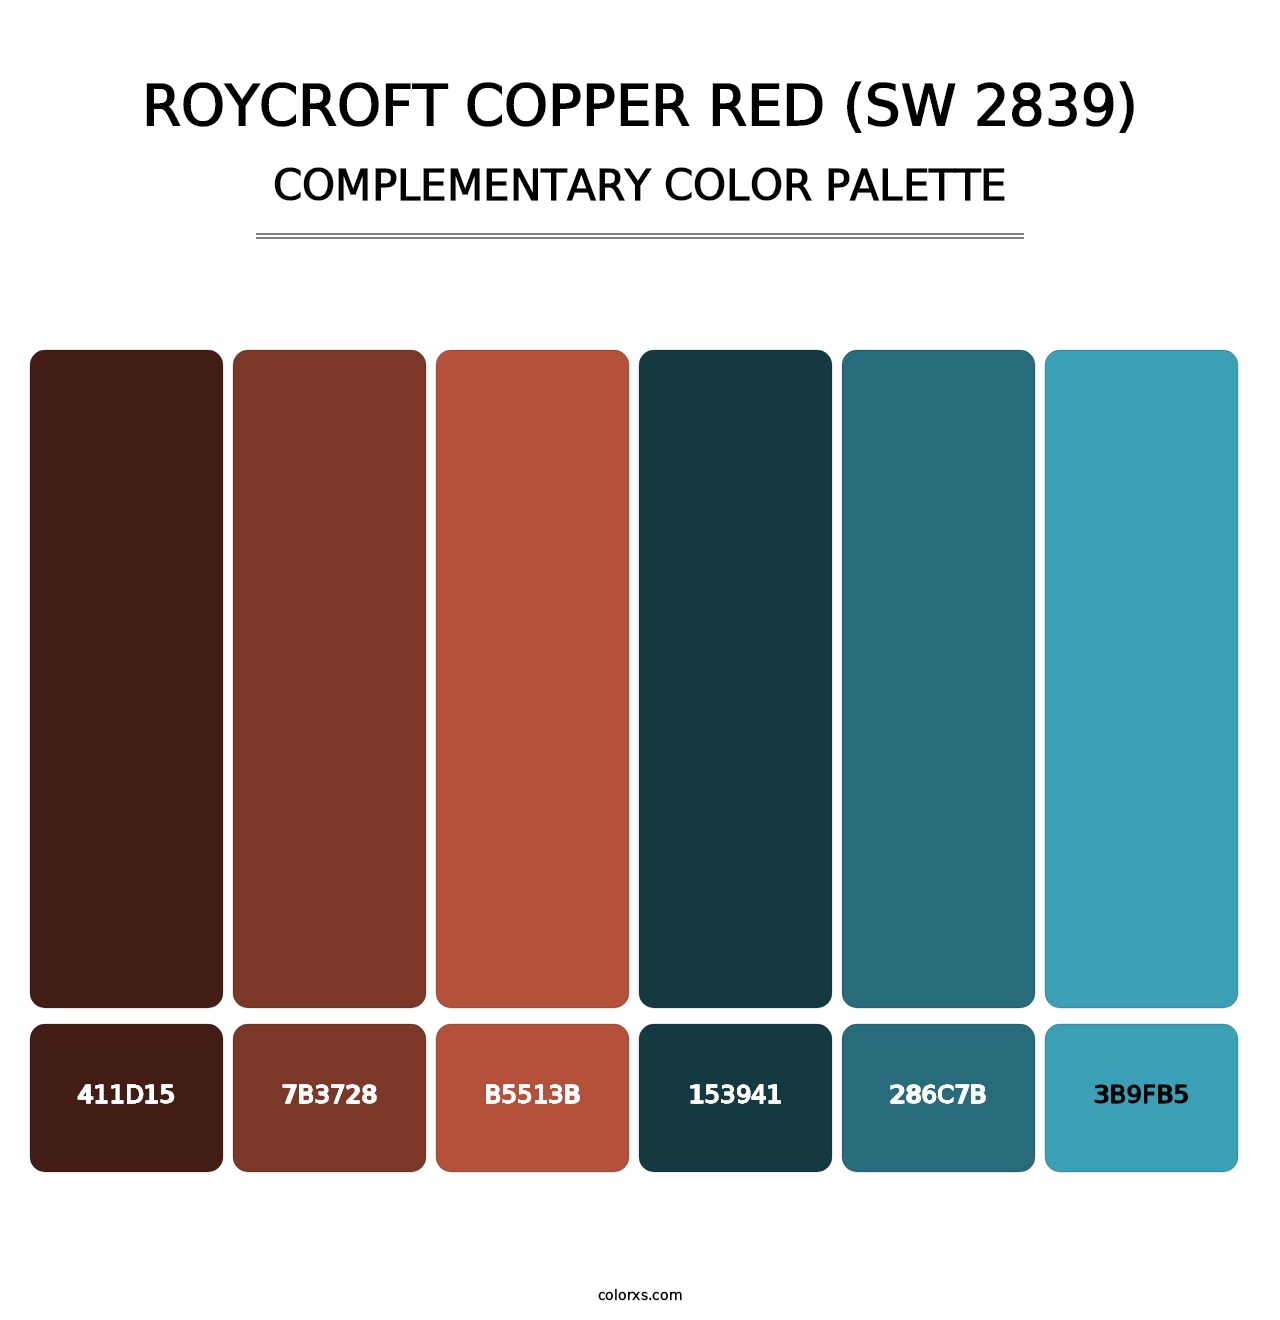 Roycroft Copper Red (SW 2839) - Complementary Color Palette